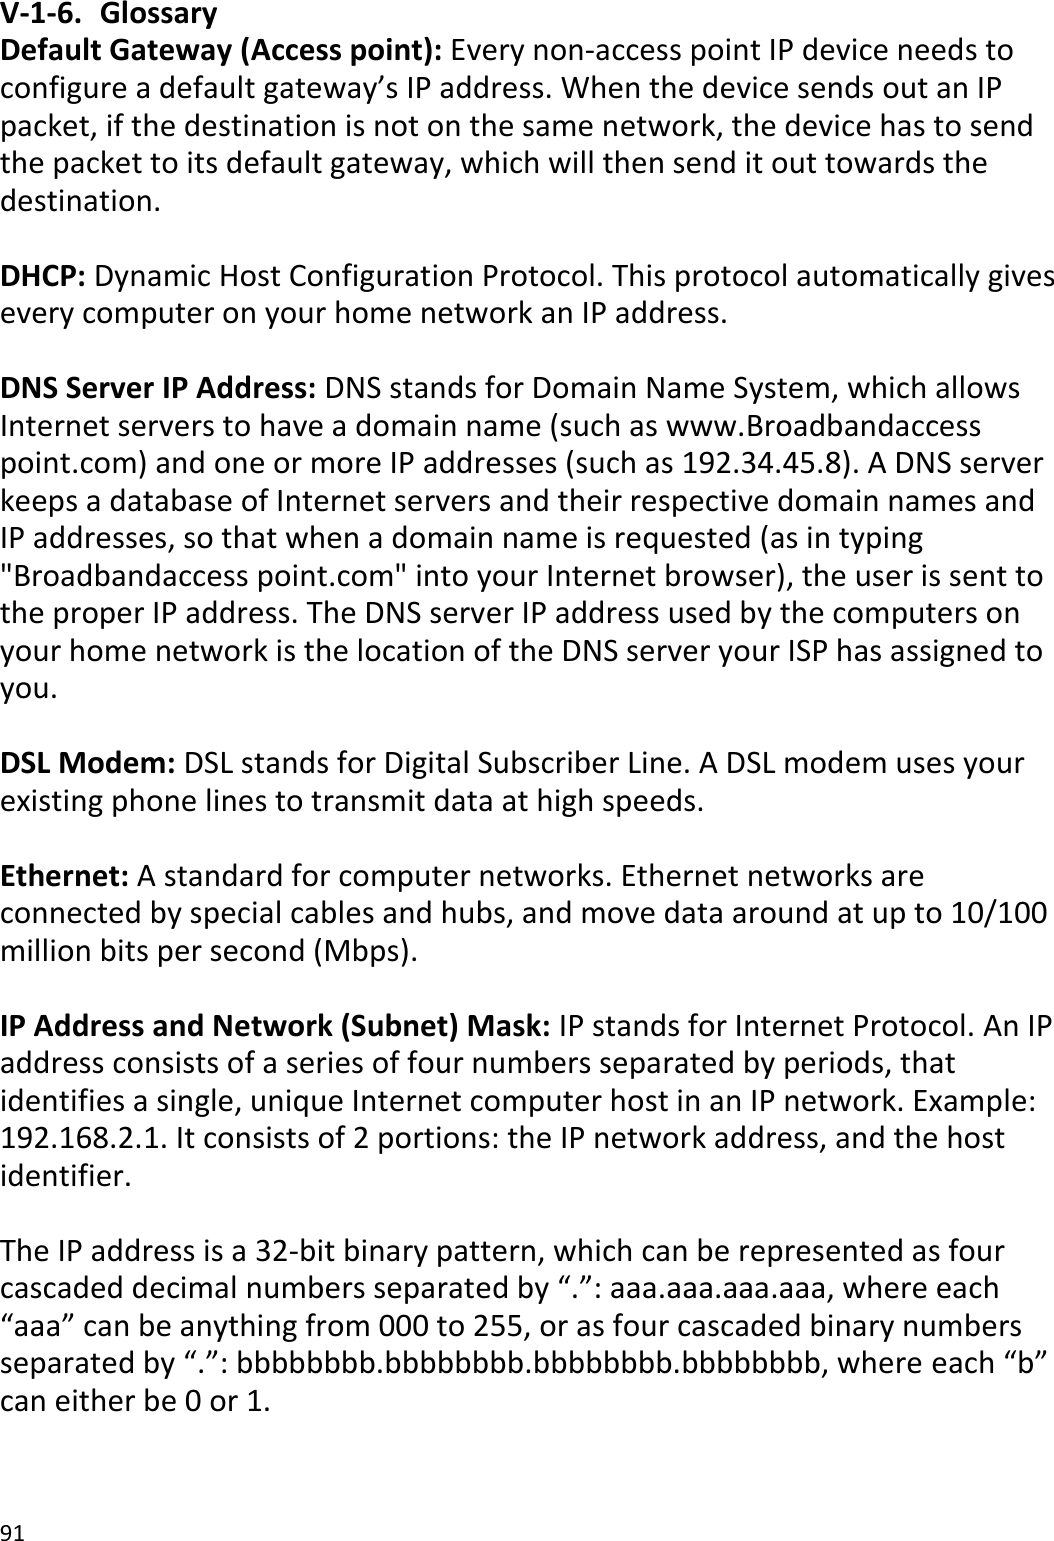 91  V-1-6.  Glossary Default Gateway (Access point): Every non-access point IP device needs to configure a default gateway’s IP address. When the device sends out an IP packet, if the destination is not on the same network, the device has to send the packet to its default gateway, which will then send it out towards the destination.  DHCP: Dynamic Host Configuration Protocol. This protocol automatically gives every computer on your home network an IP address.  DNS Server IP Address: DNS stands for Domain Name System, which allows Internet servers to have a domain name (such as www.Broadbandaccess point.com) and one or more IP addresses (such as 192.34.45.8). A DNS server keeps a database of Internet servers and their respective domain names and IP addresses, so that when a domain name is requested (as in typing &quot;Broadbandaccess point.com&quot; into your Internet browser), the user is sent to the proper IP address. The DNS server IP address used by the computers on your home network is the location of the DNS server your ISP has assigned to you.   DSL Modem: DSL stands for Digital Subscriber Line. A DSL modem uses your existing phone lines to transmit data at high speeds.   Ethernet: A standard for computer networks. Ethernet networks are connected by special cables and hubs, and move data around at up to 10/100 million bits per second (Mbps).  IP Address and Network (Subnet) Mask: IP stands for Internet Protocol. An IP address consists of a series of four numbers separated by periods, that identifies a single, unique Internet computer host in an IP network. Example: 192.168.2.1. It consists of 2 portions: the IP network address, and the host identifier.  The IP address is a 32-bit binary pattern, which can be represented as four cascaded decimal numbers separated by “.”: aaa.aaa.aaa.aaa, where each “aaa” can be anything from 000 to 255, or as four cascaded binary numbers separated by “.”: bbbbbbbb.bbbbbbbb.bbbbbbbb.bbbbbbbb, where each “b” can either be 0 or 1.  